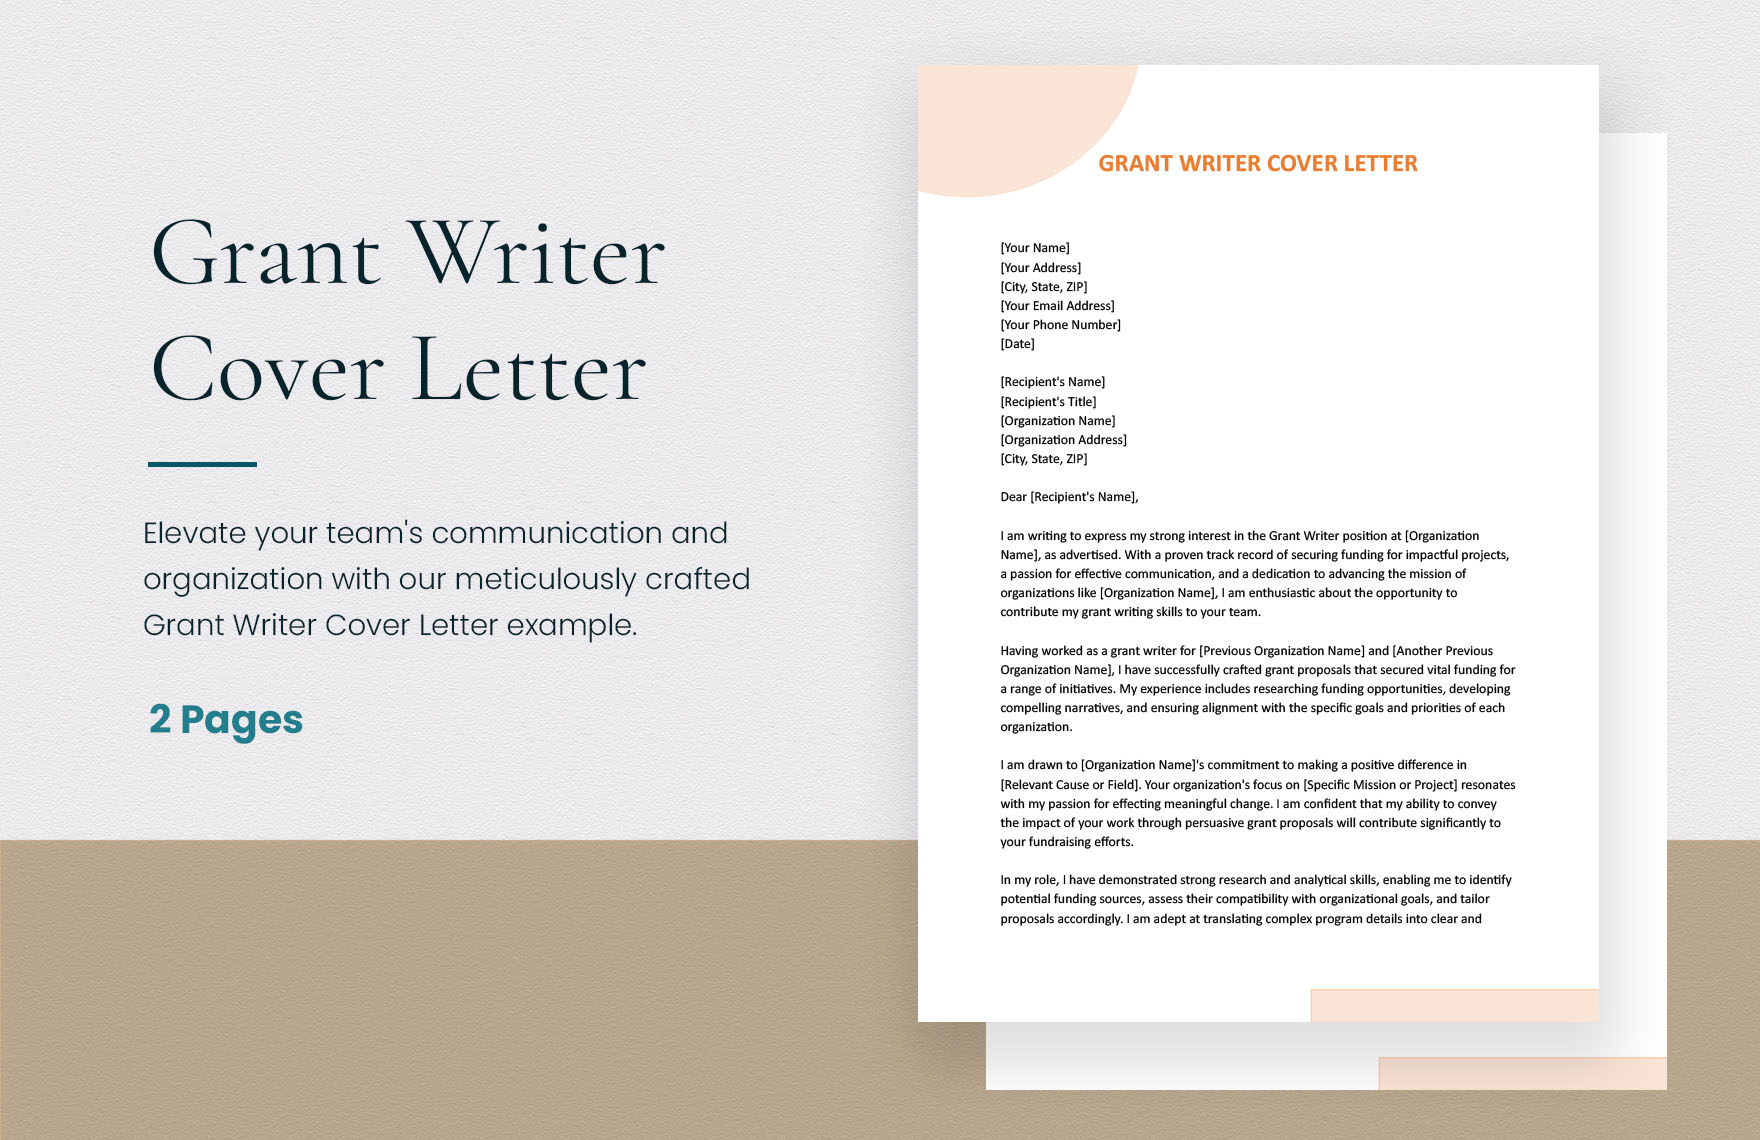 Grant Writer Cover Letter in Word, Google Docs, Apple Pages